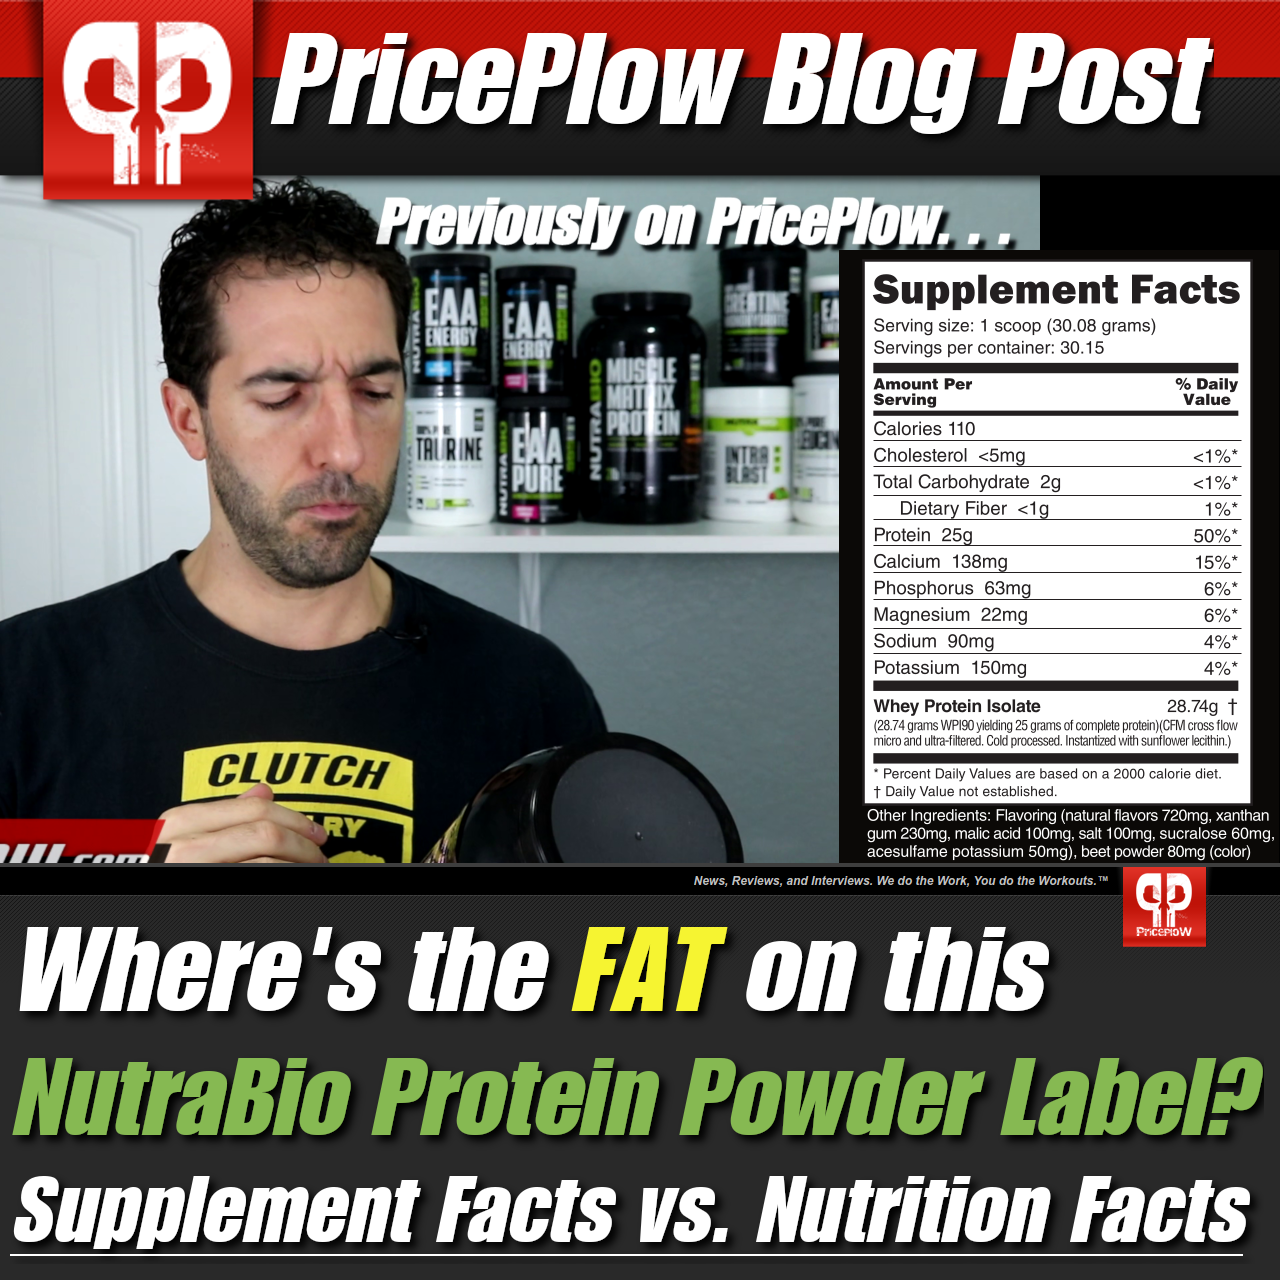 Supplement Facts vs. Nutrition Facts